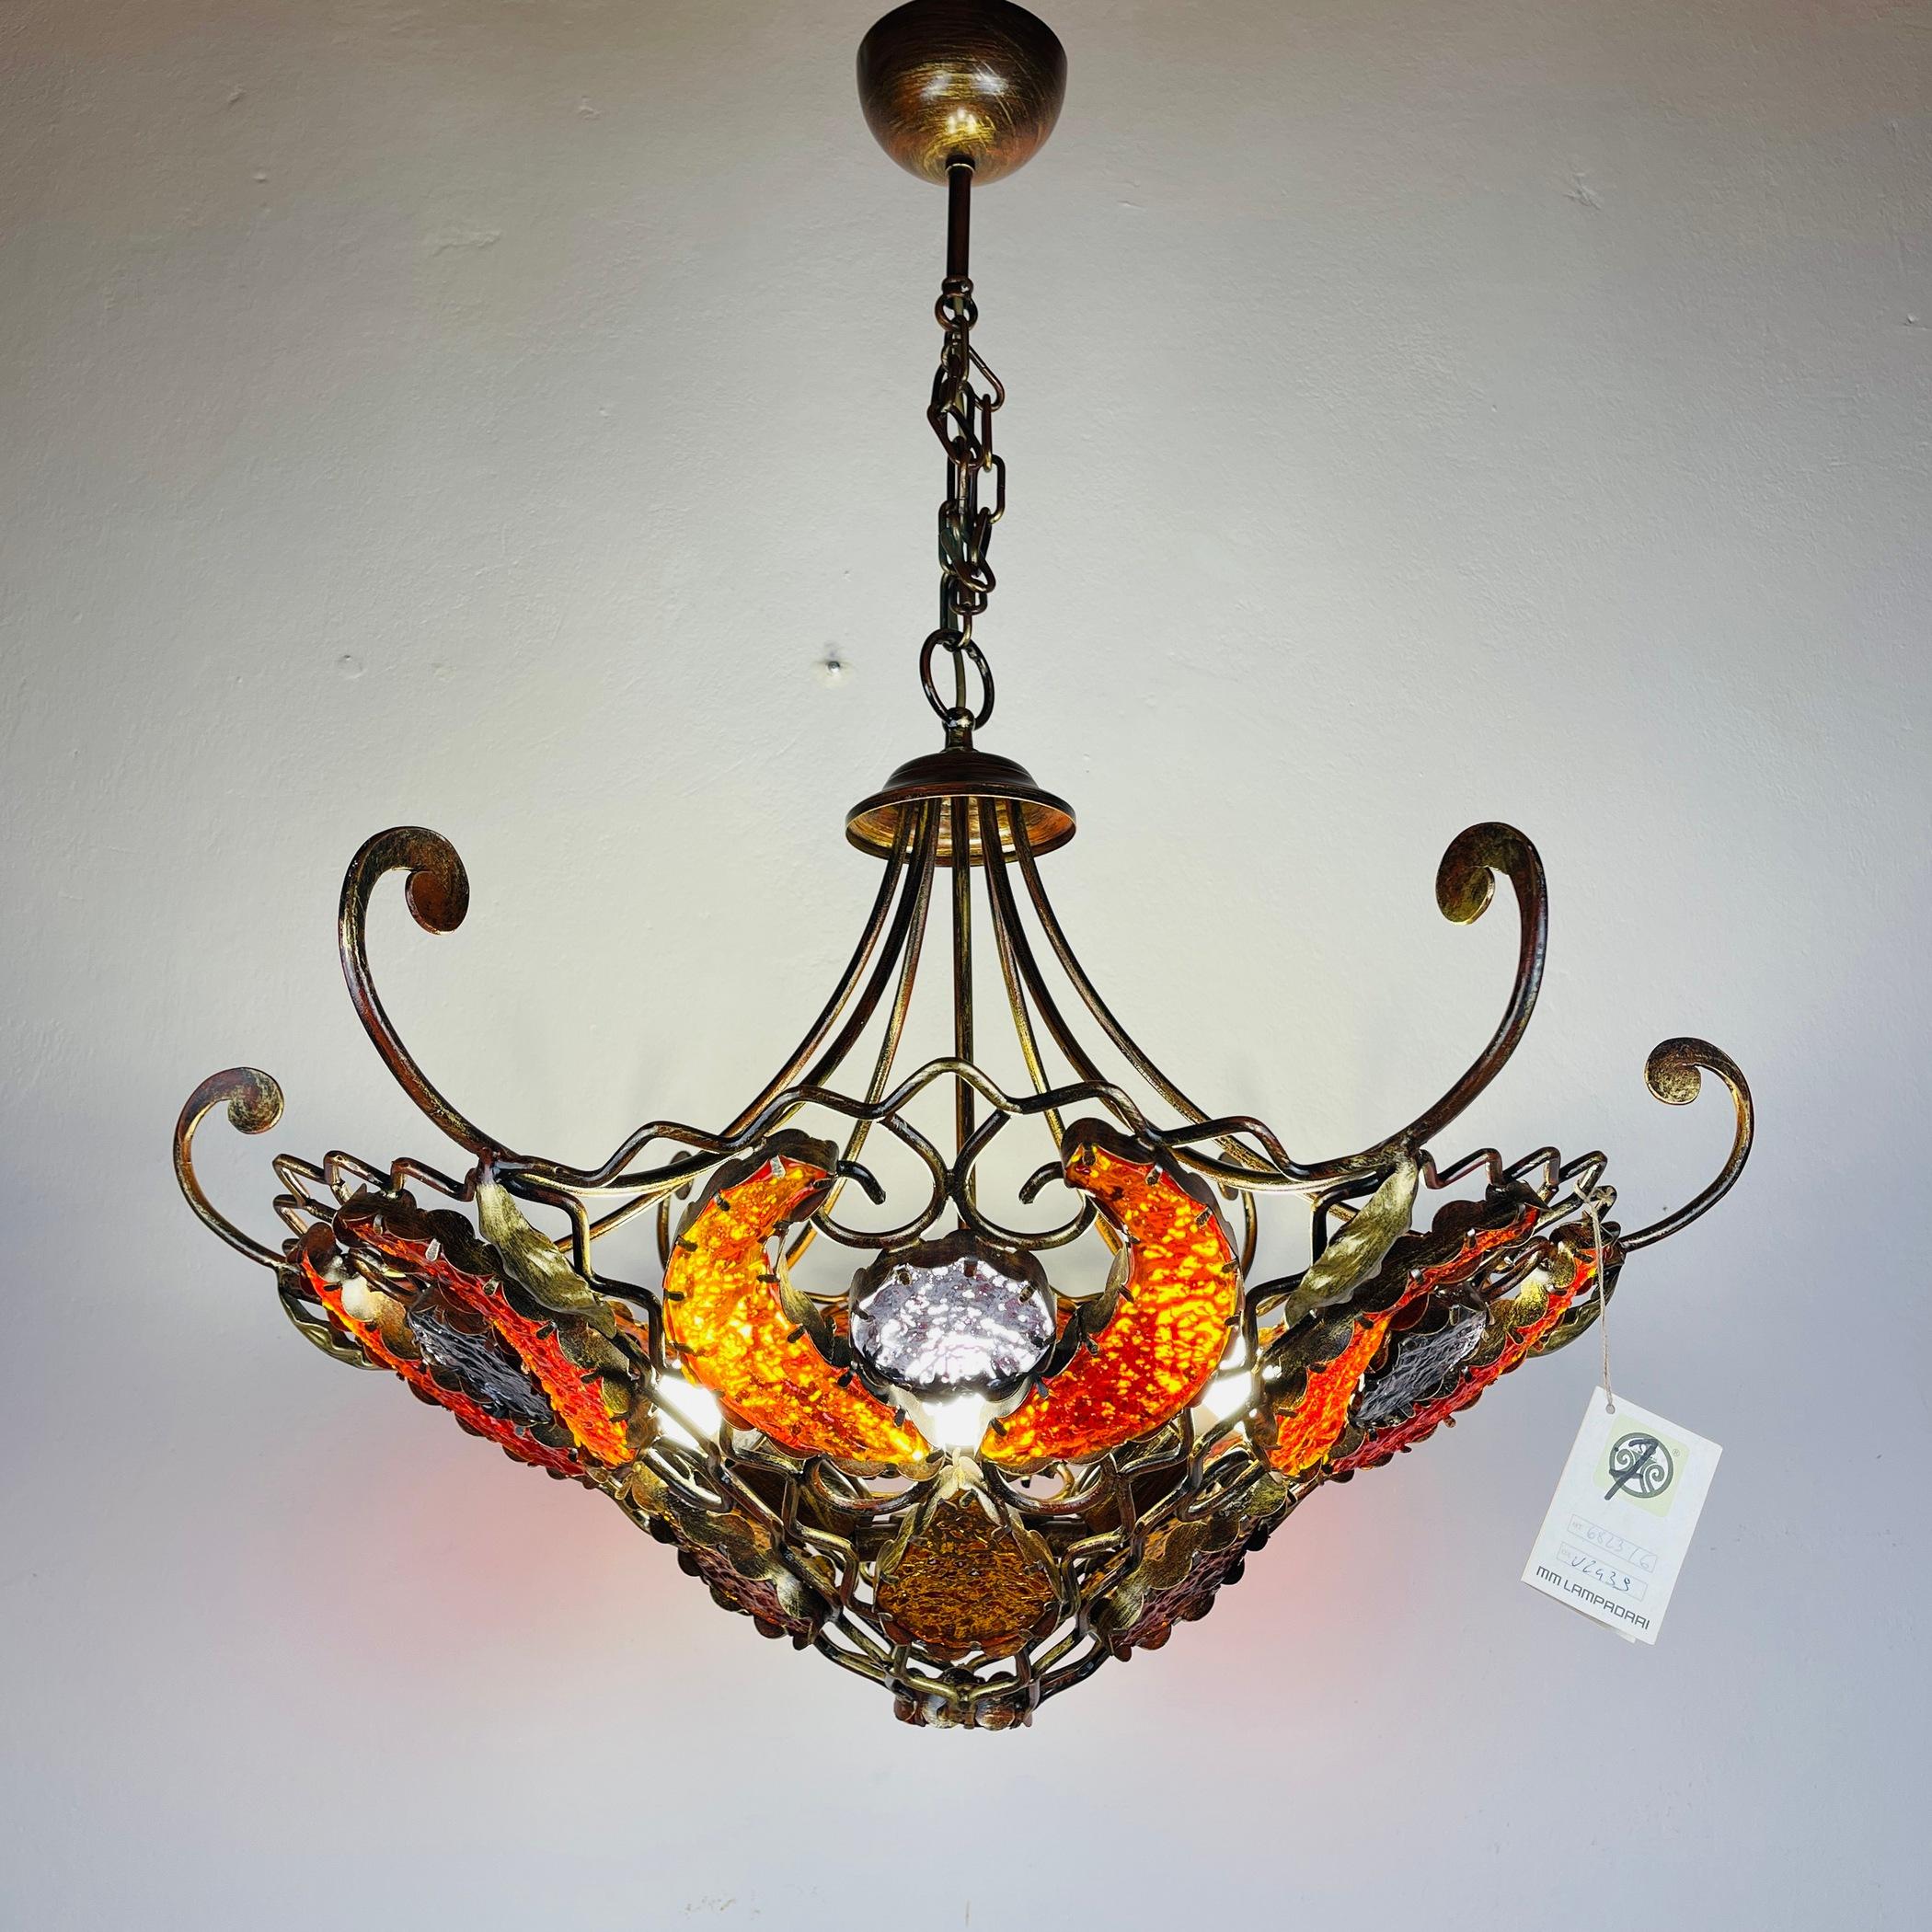 Introduce an exquisite blend of metal and Murano glass into your space with this chandelier by MM Lampadari, crafted in Italy during the 1990s, according to the catalog of MM Lampadari. Featuring wrought iron and vibrant Murano glass, this piece